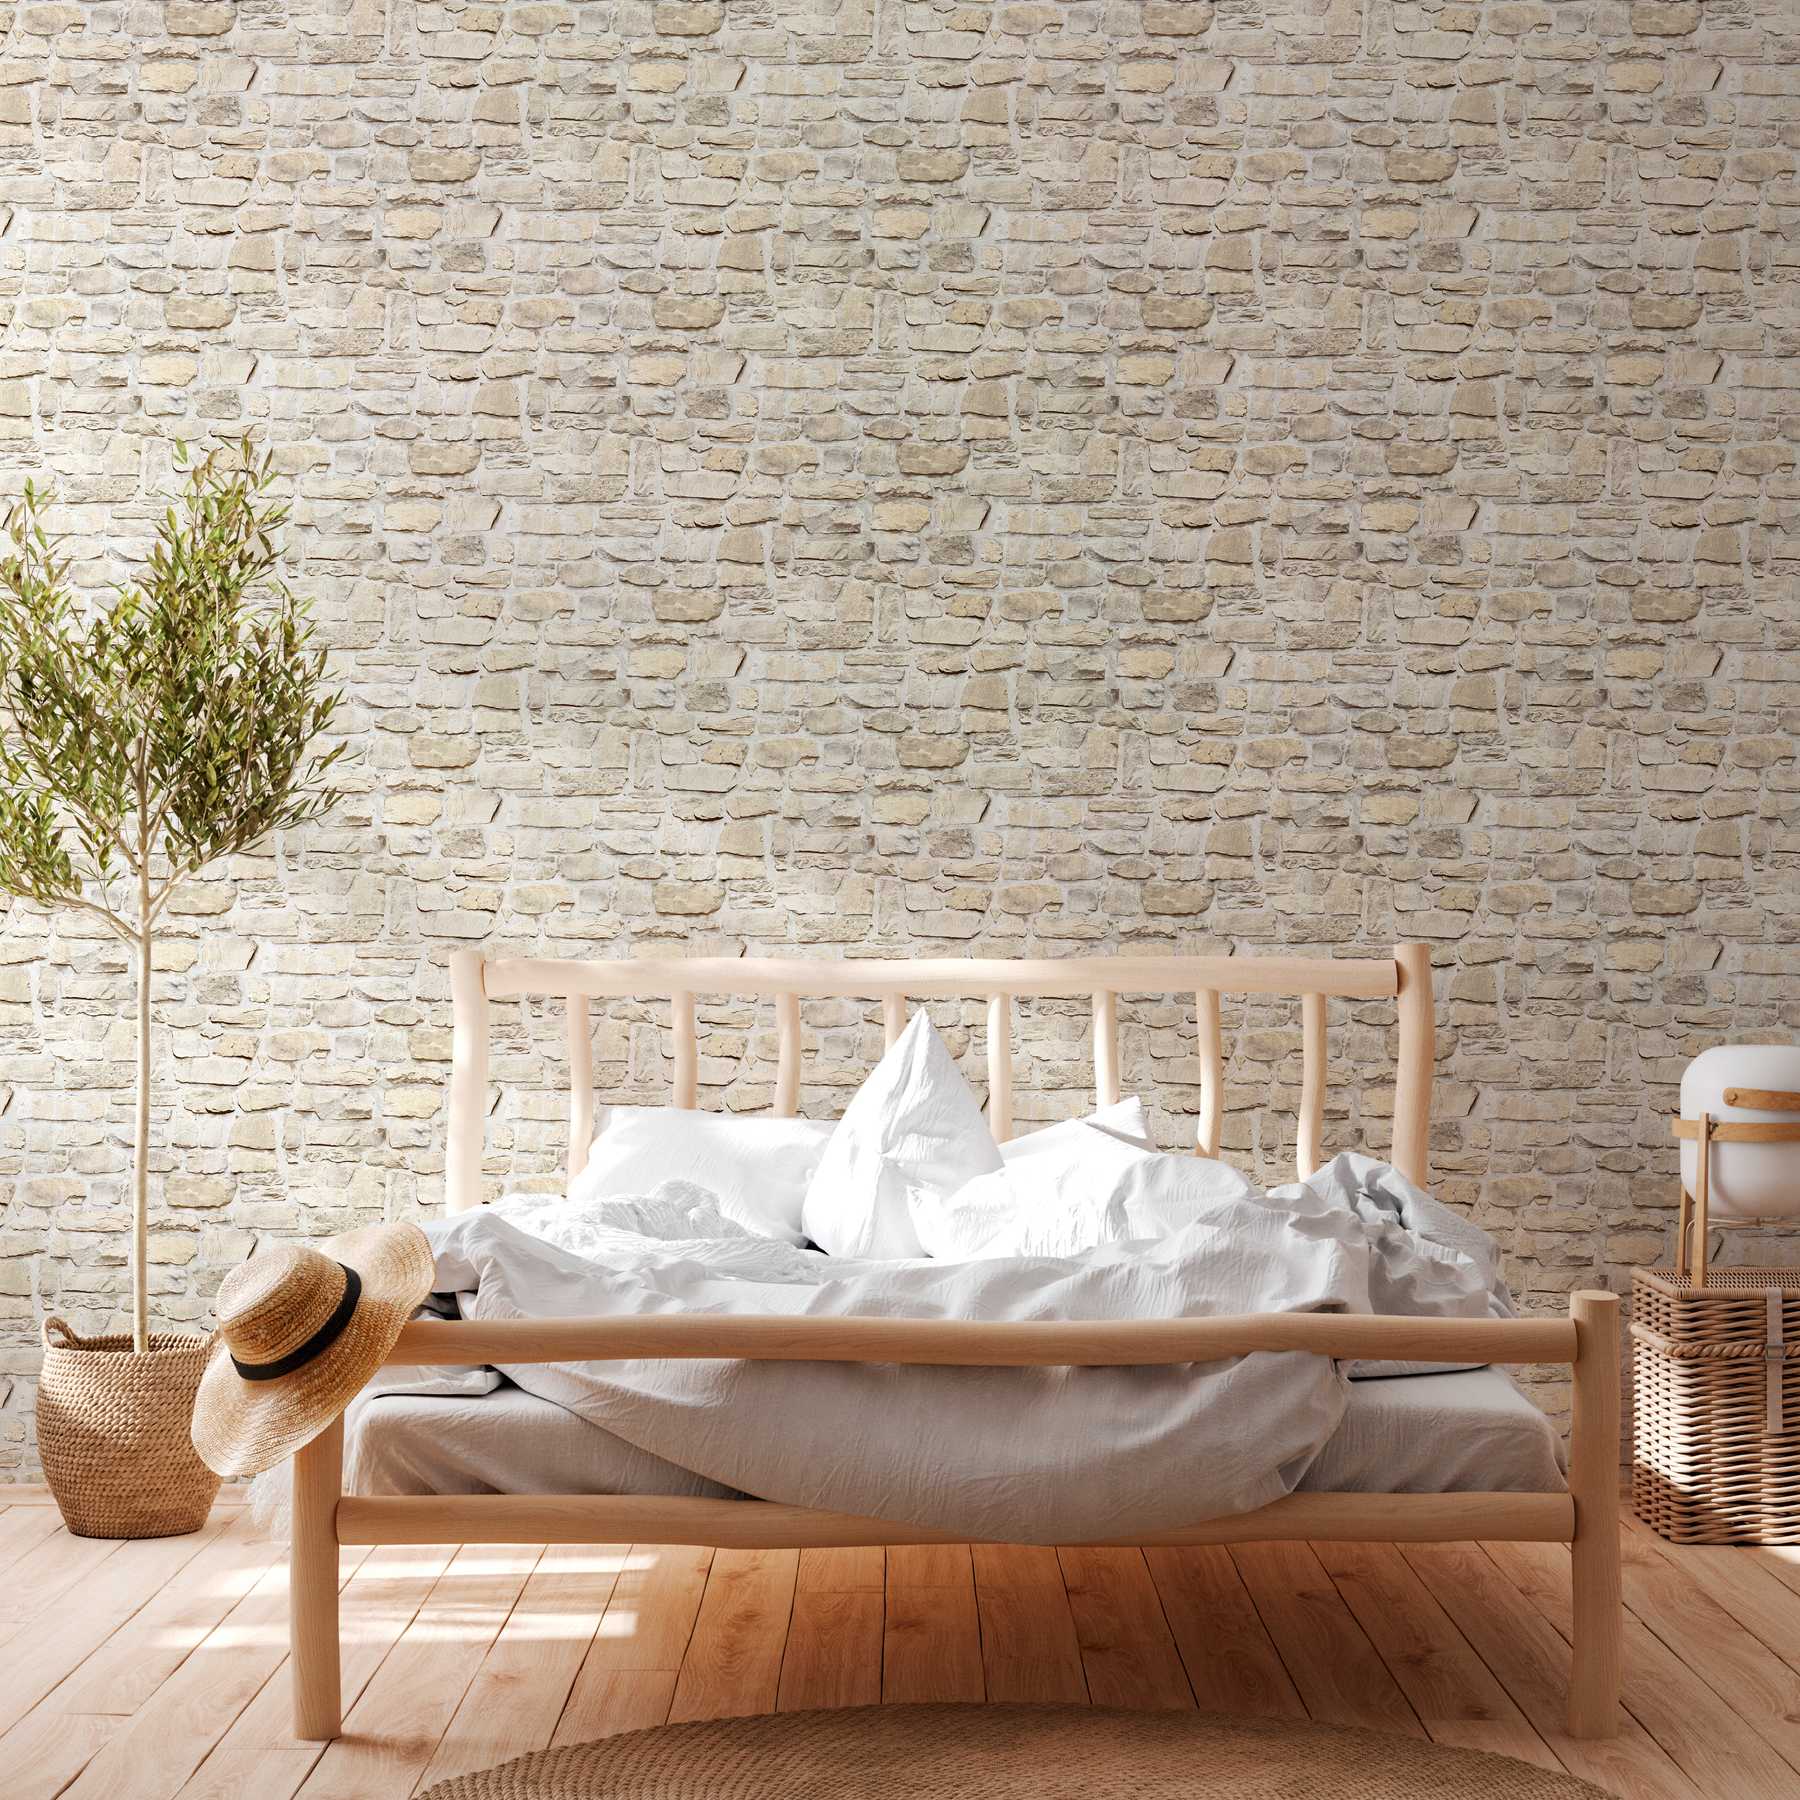             Stone wallpaper with natural stone masonry in country style - beige, yellow
        